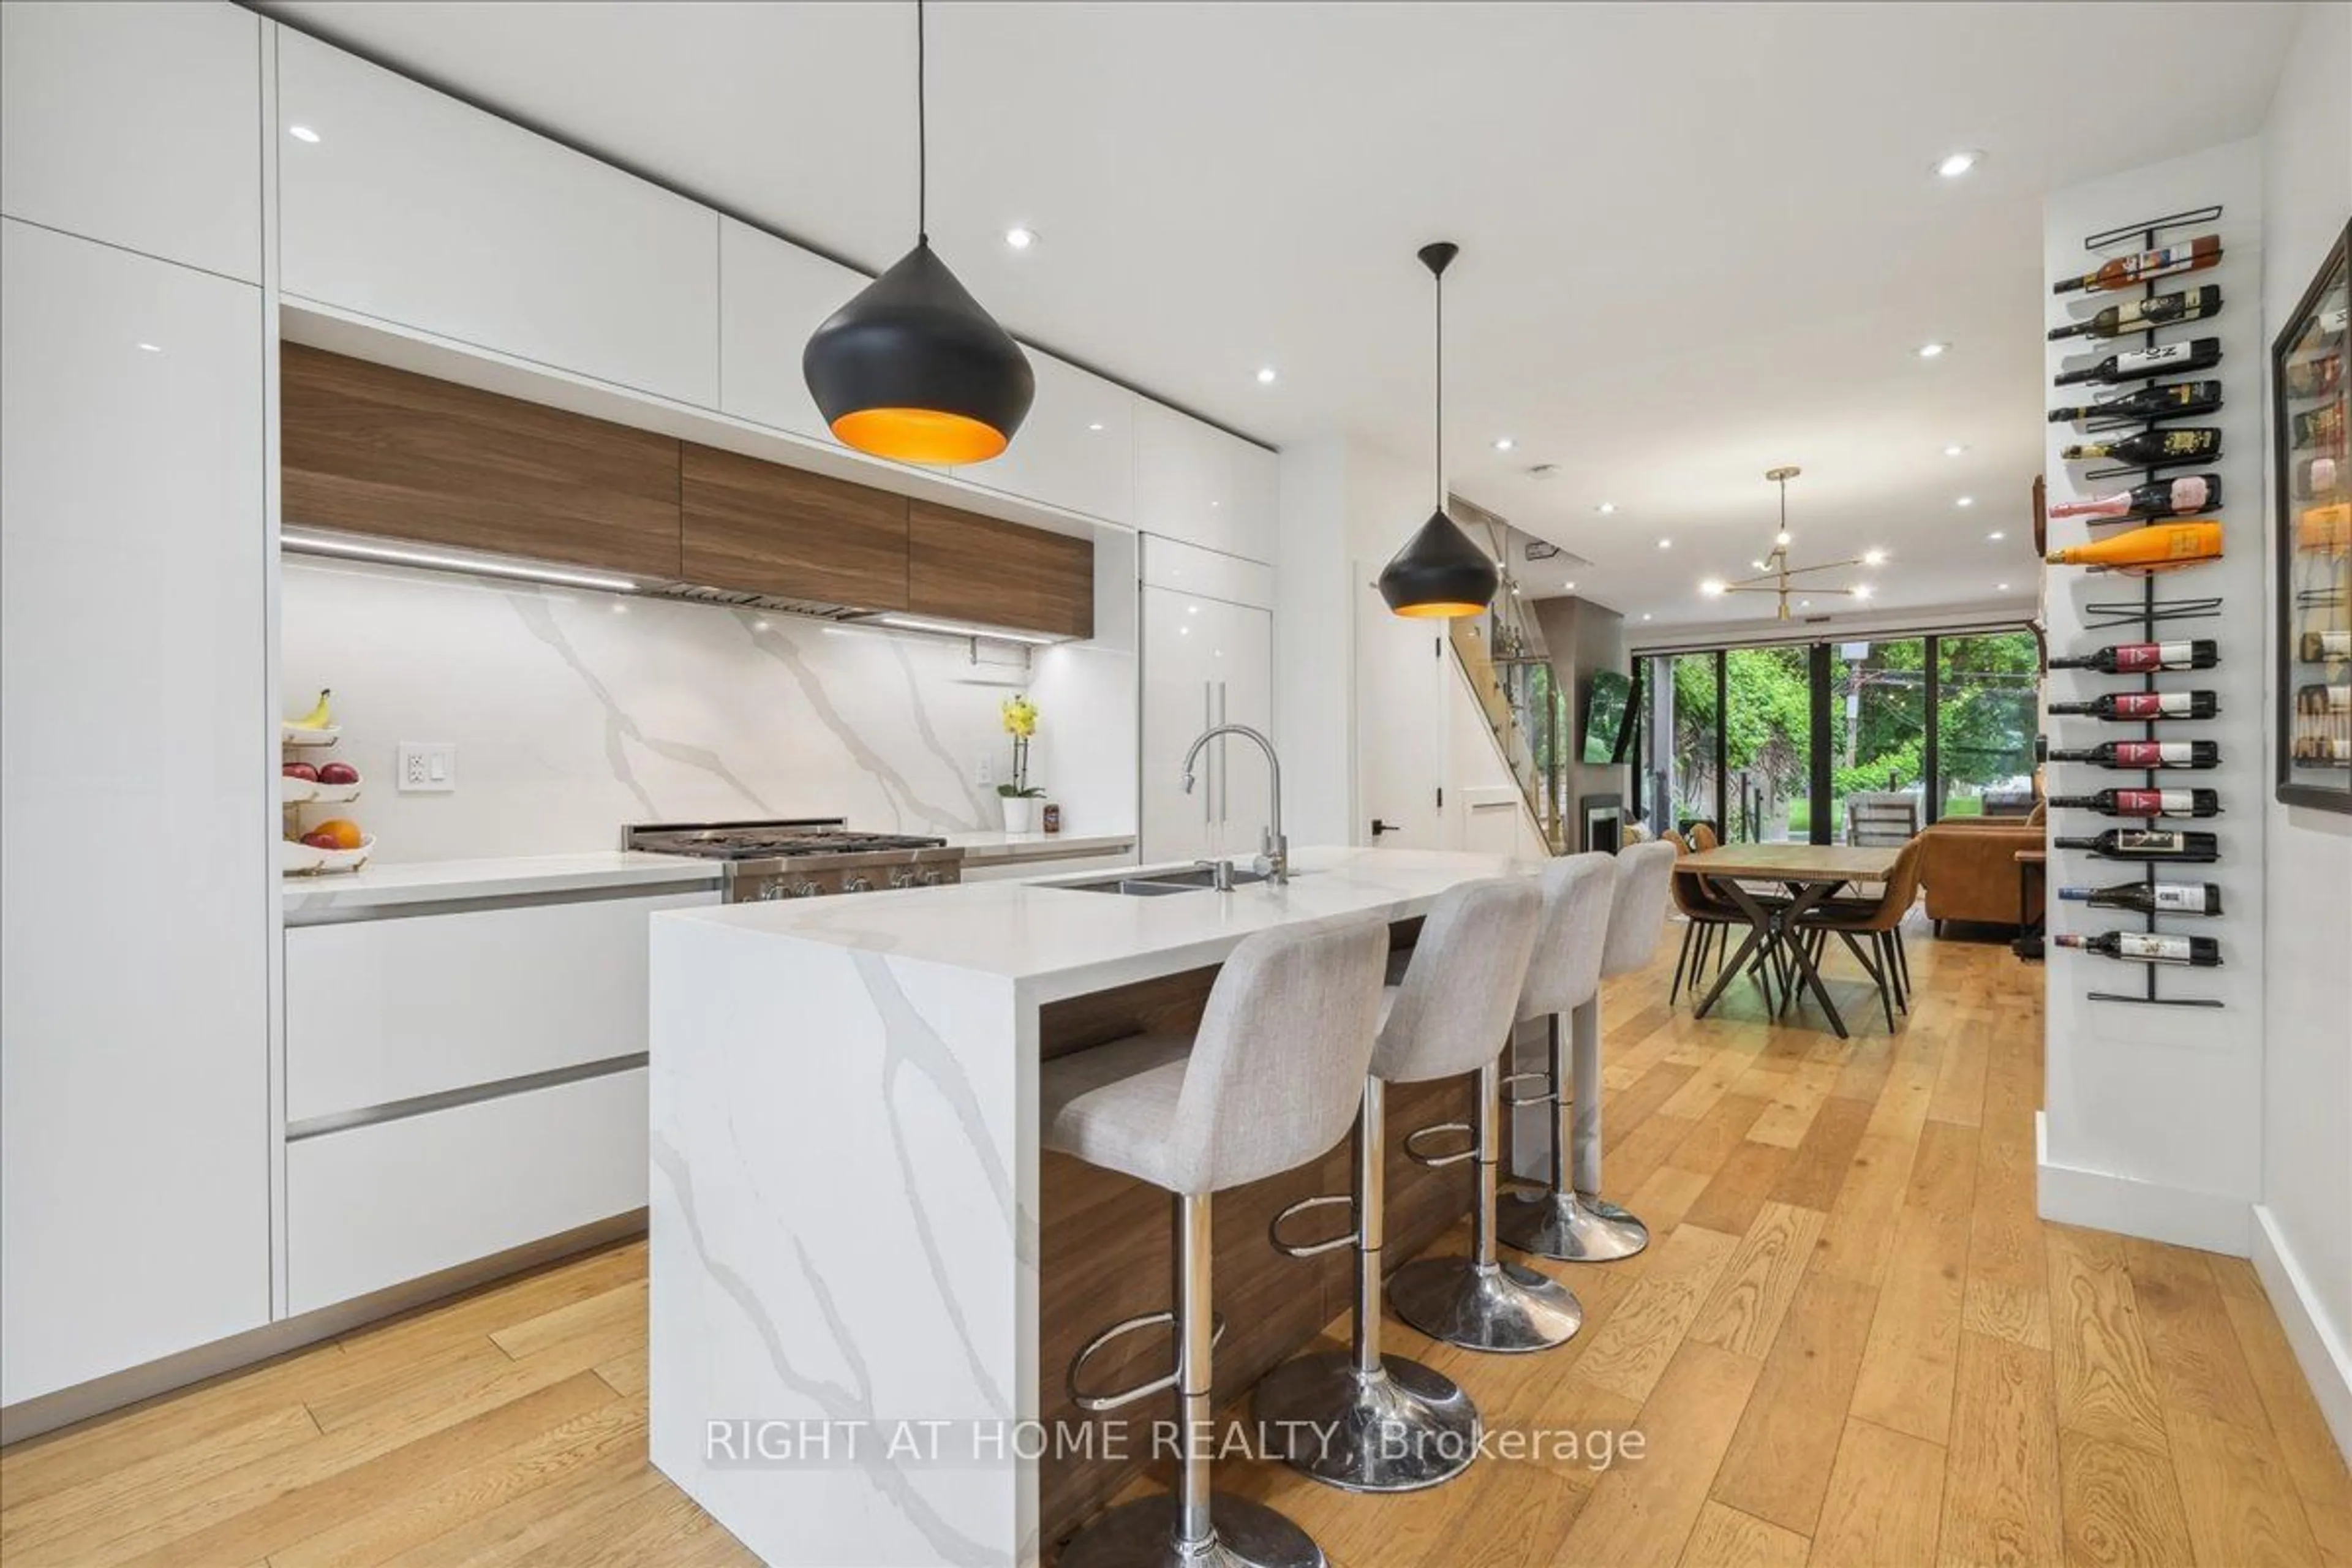 Contemporary kitchen for 47 Woodfield Rd, Toronto Ontario M4L 2W4